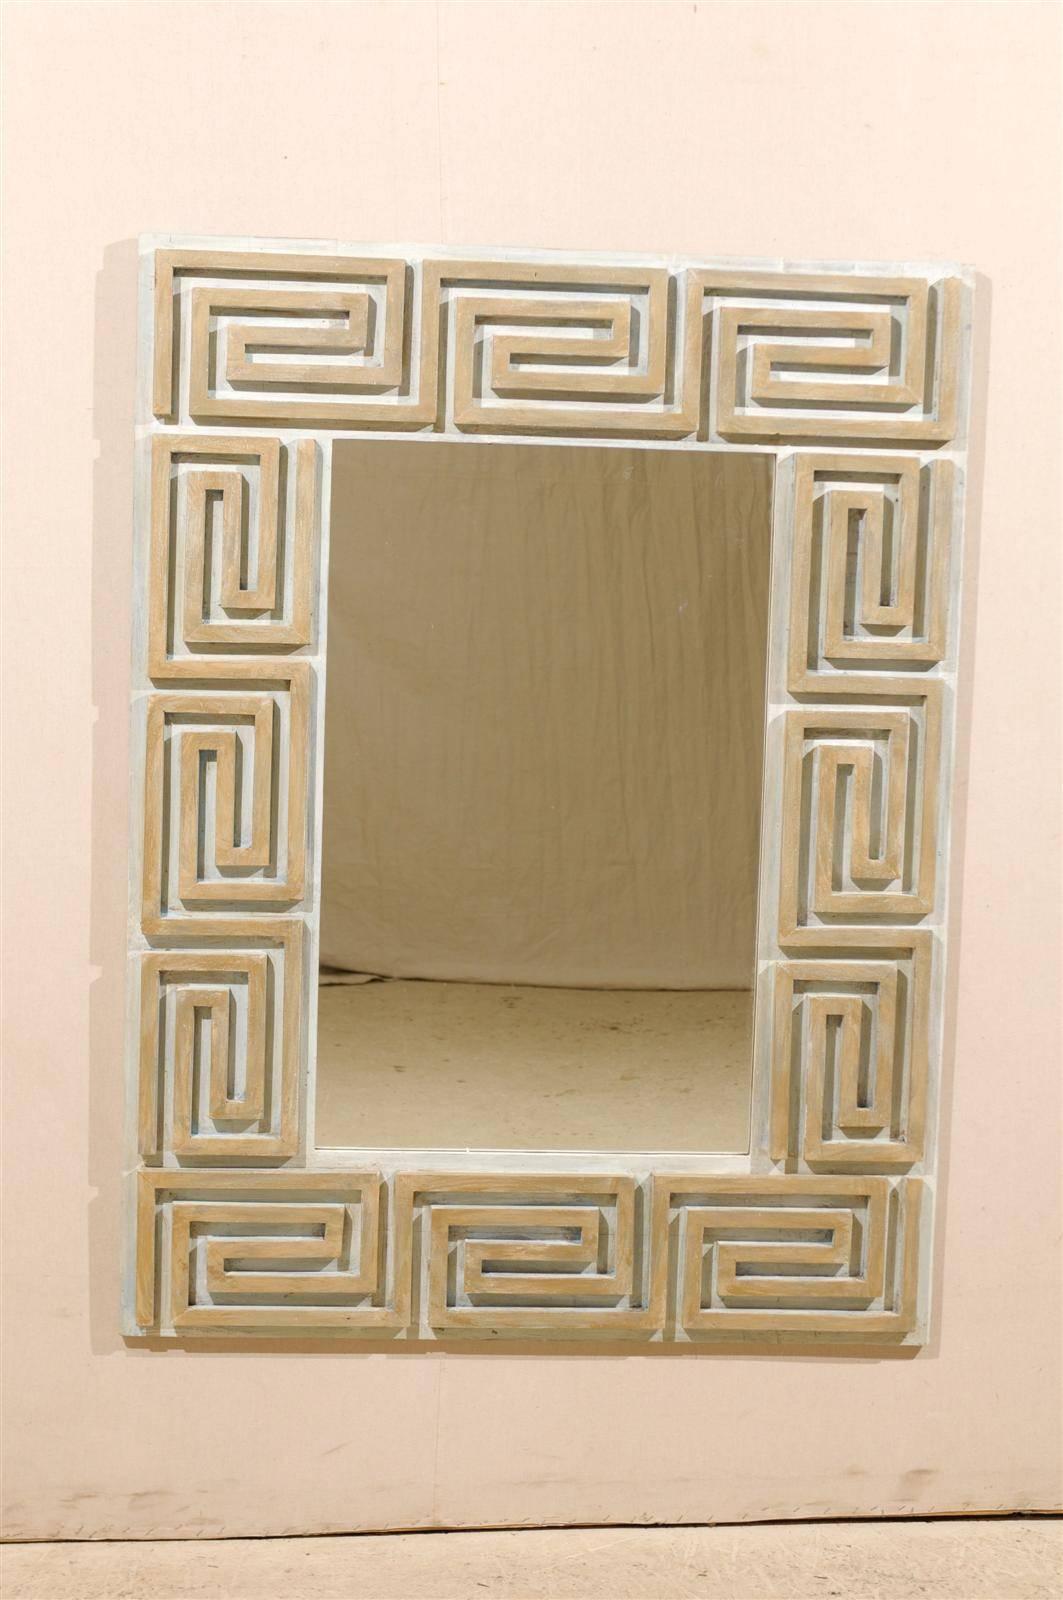 A Greek key painted wood mirror with clear glass. This mirror features a repeating Greek key motif in the surround and is custom-made out of old wood. This mirror's surround is a mix of tan, beige and cream in color. This neutral piece would look